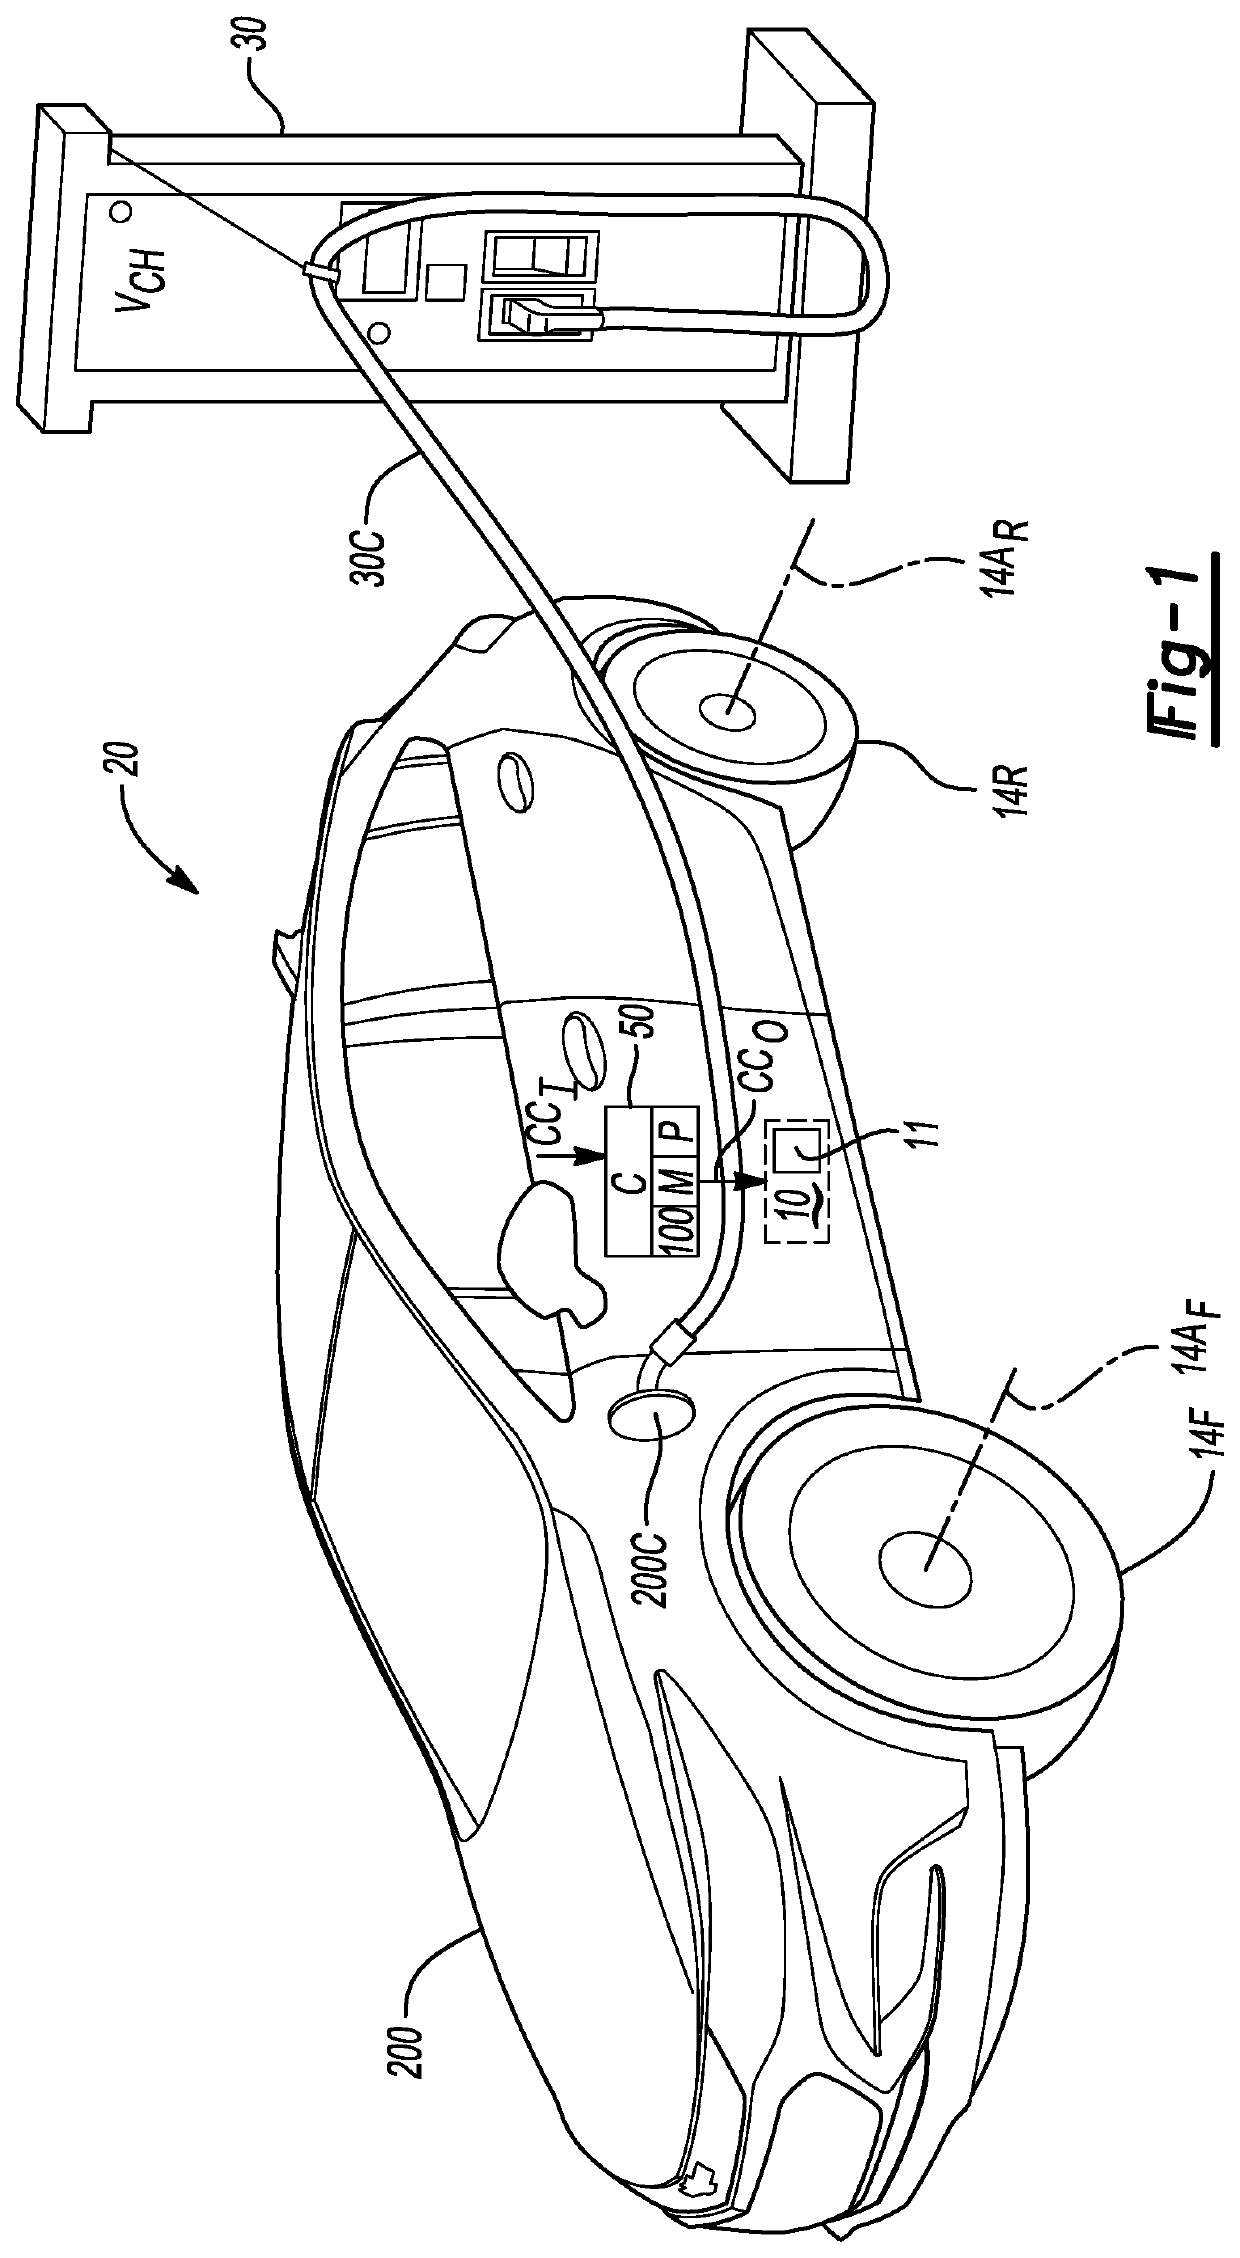 Diagnostic method for electric propulsion system with reconfigurable battery system